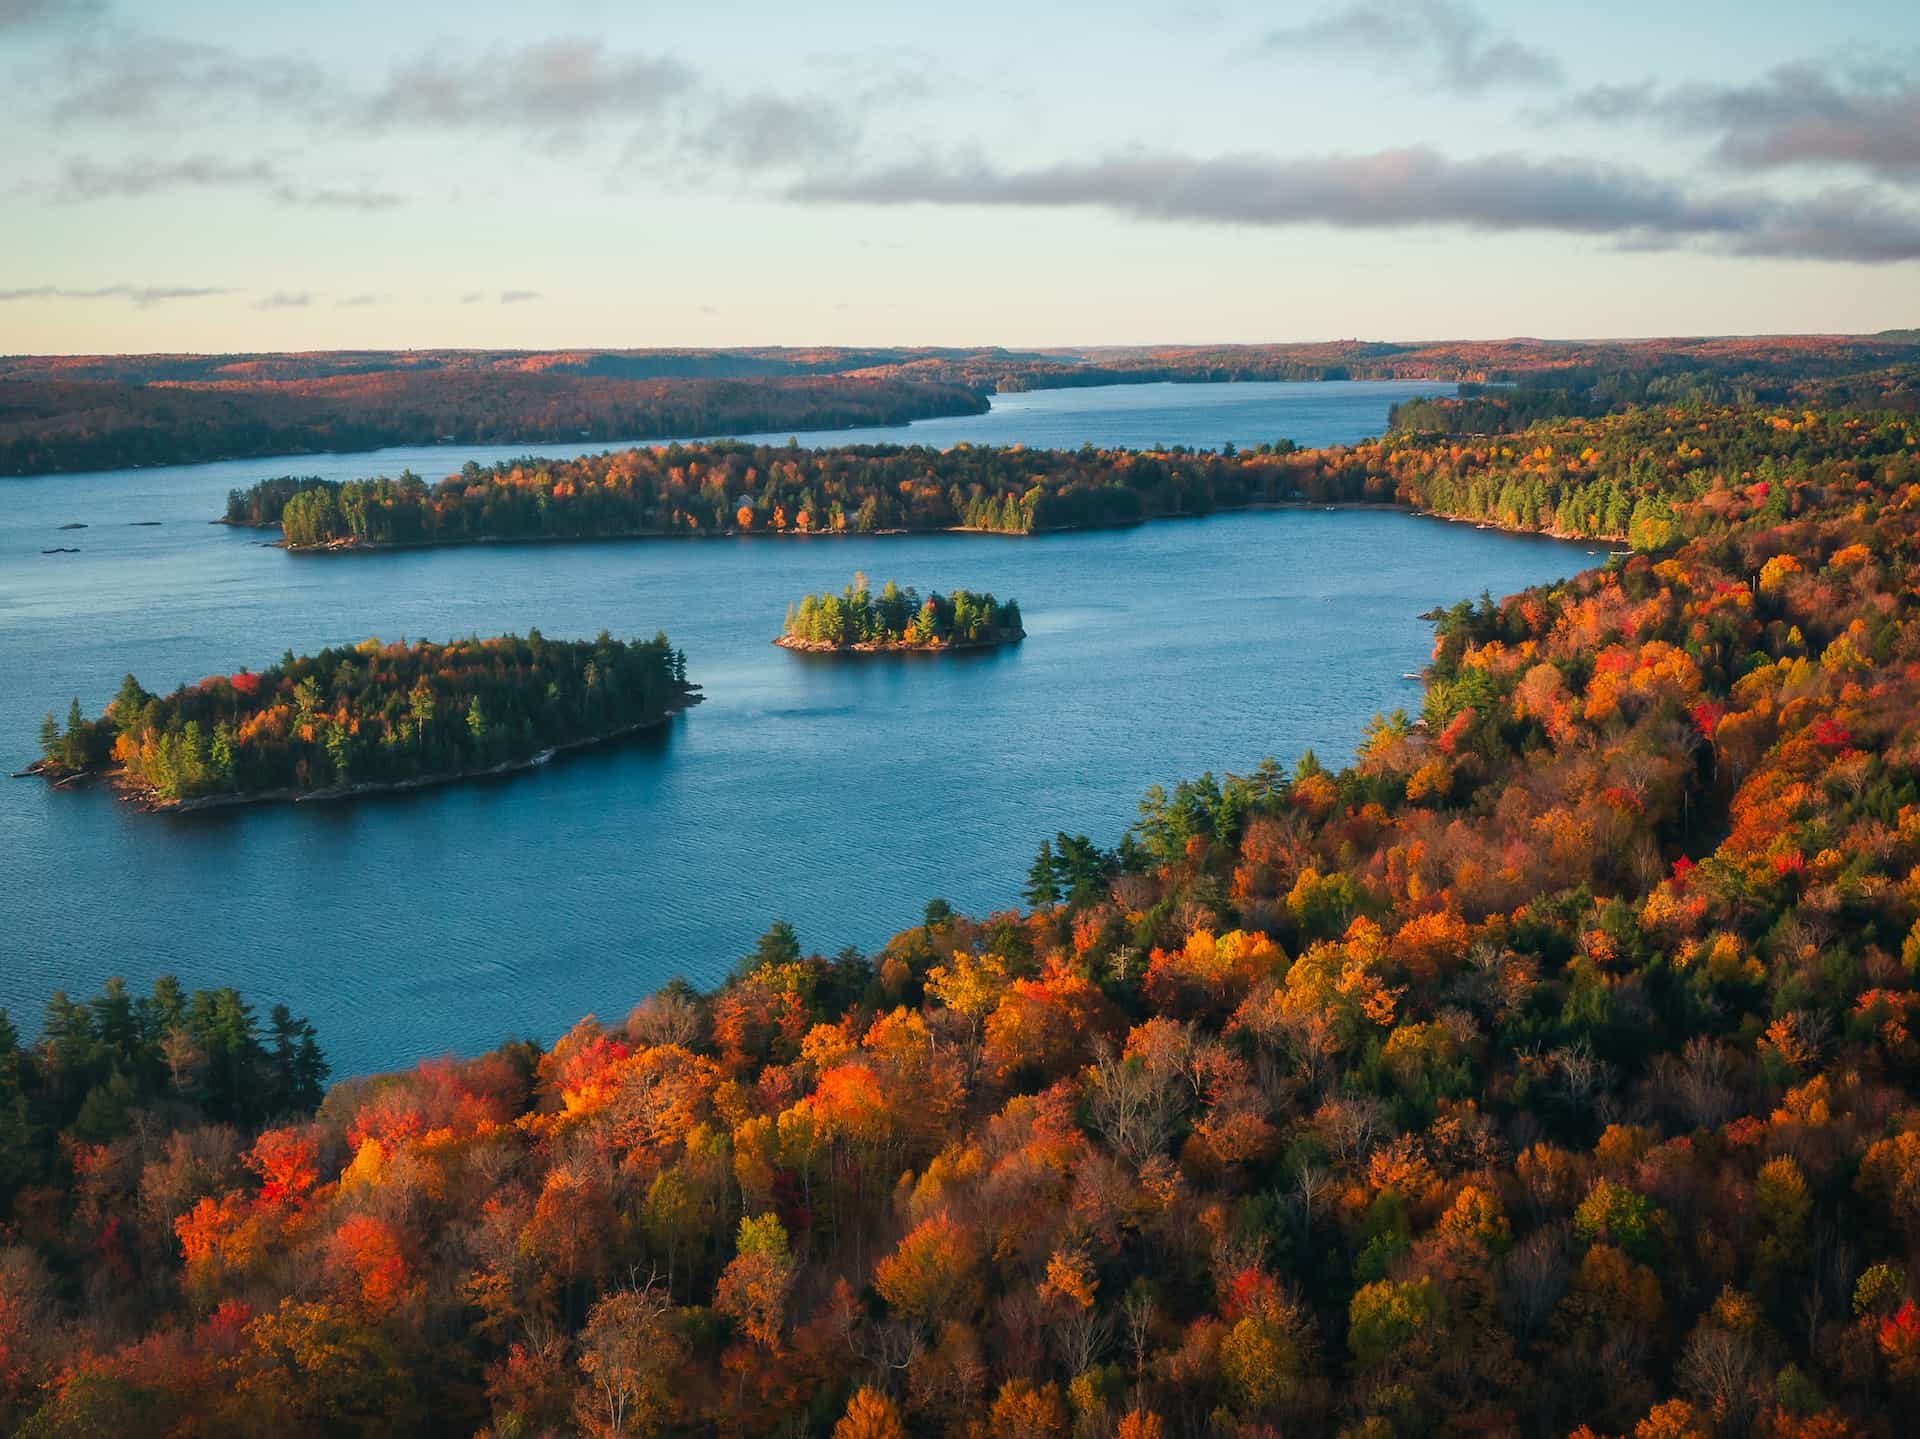 An aerial view of a peninsula and two small islands on a lake in rural Ontario, Canada, with rolling waves of fall-colored trees covering the landscape.